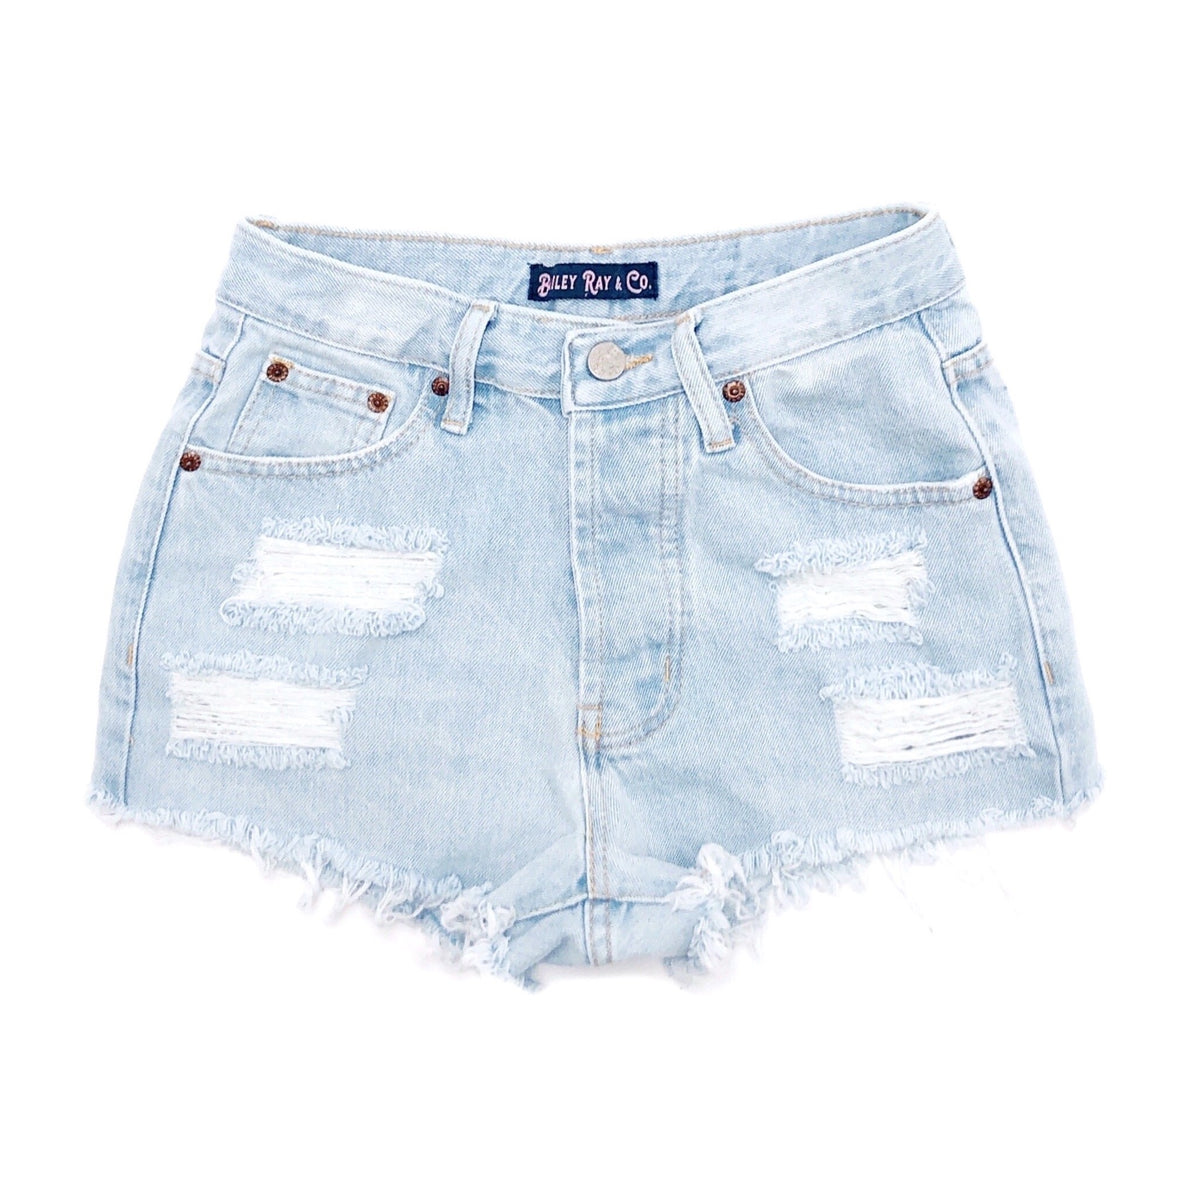 Bailey Ray and Co - Light Wash, Distressed High Waisted Denim